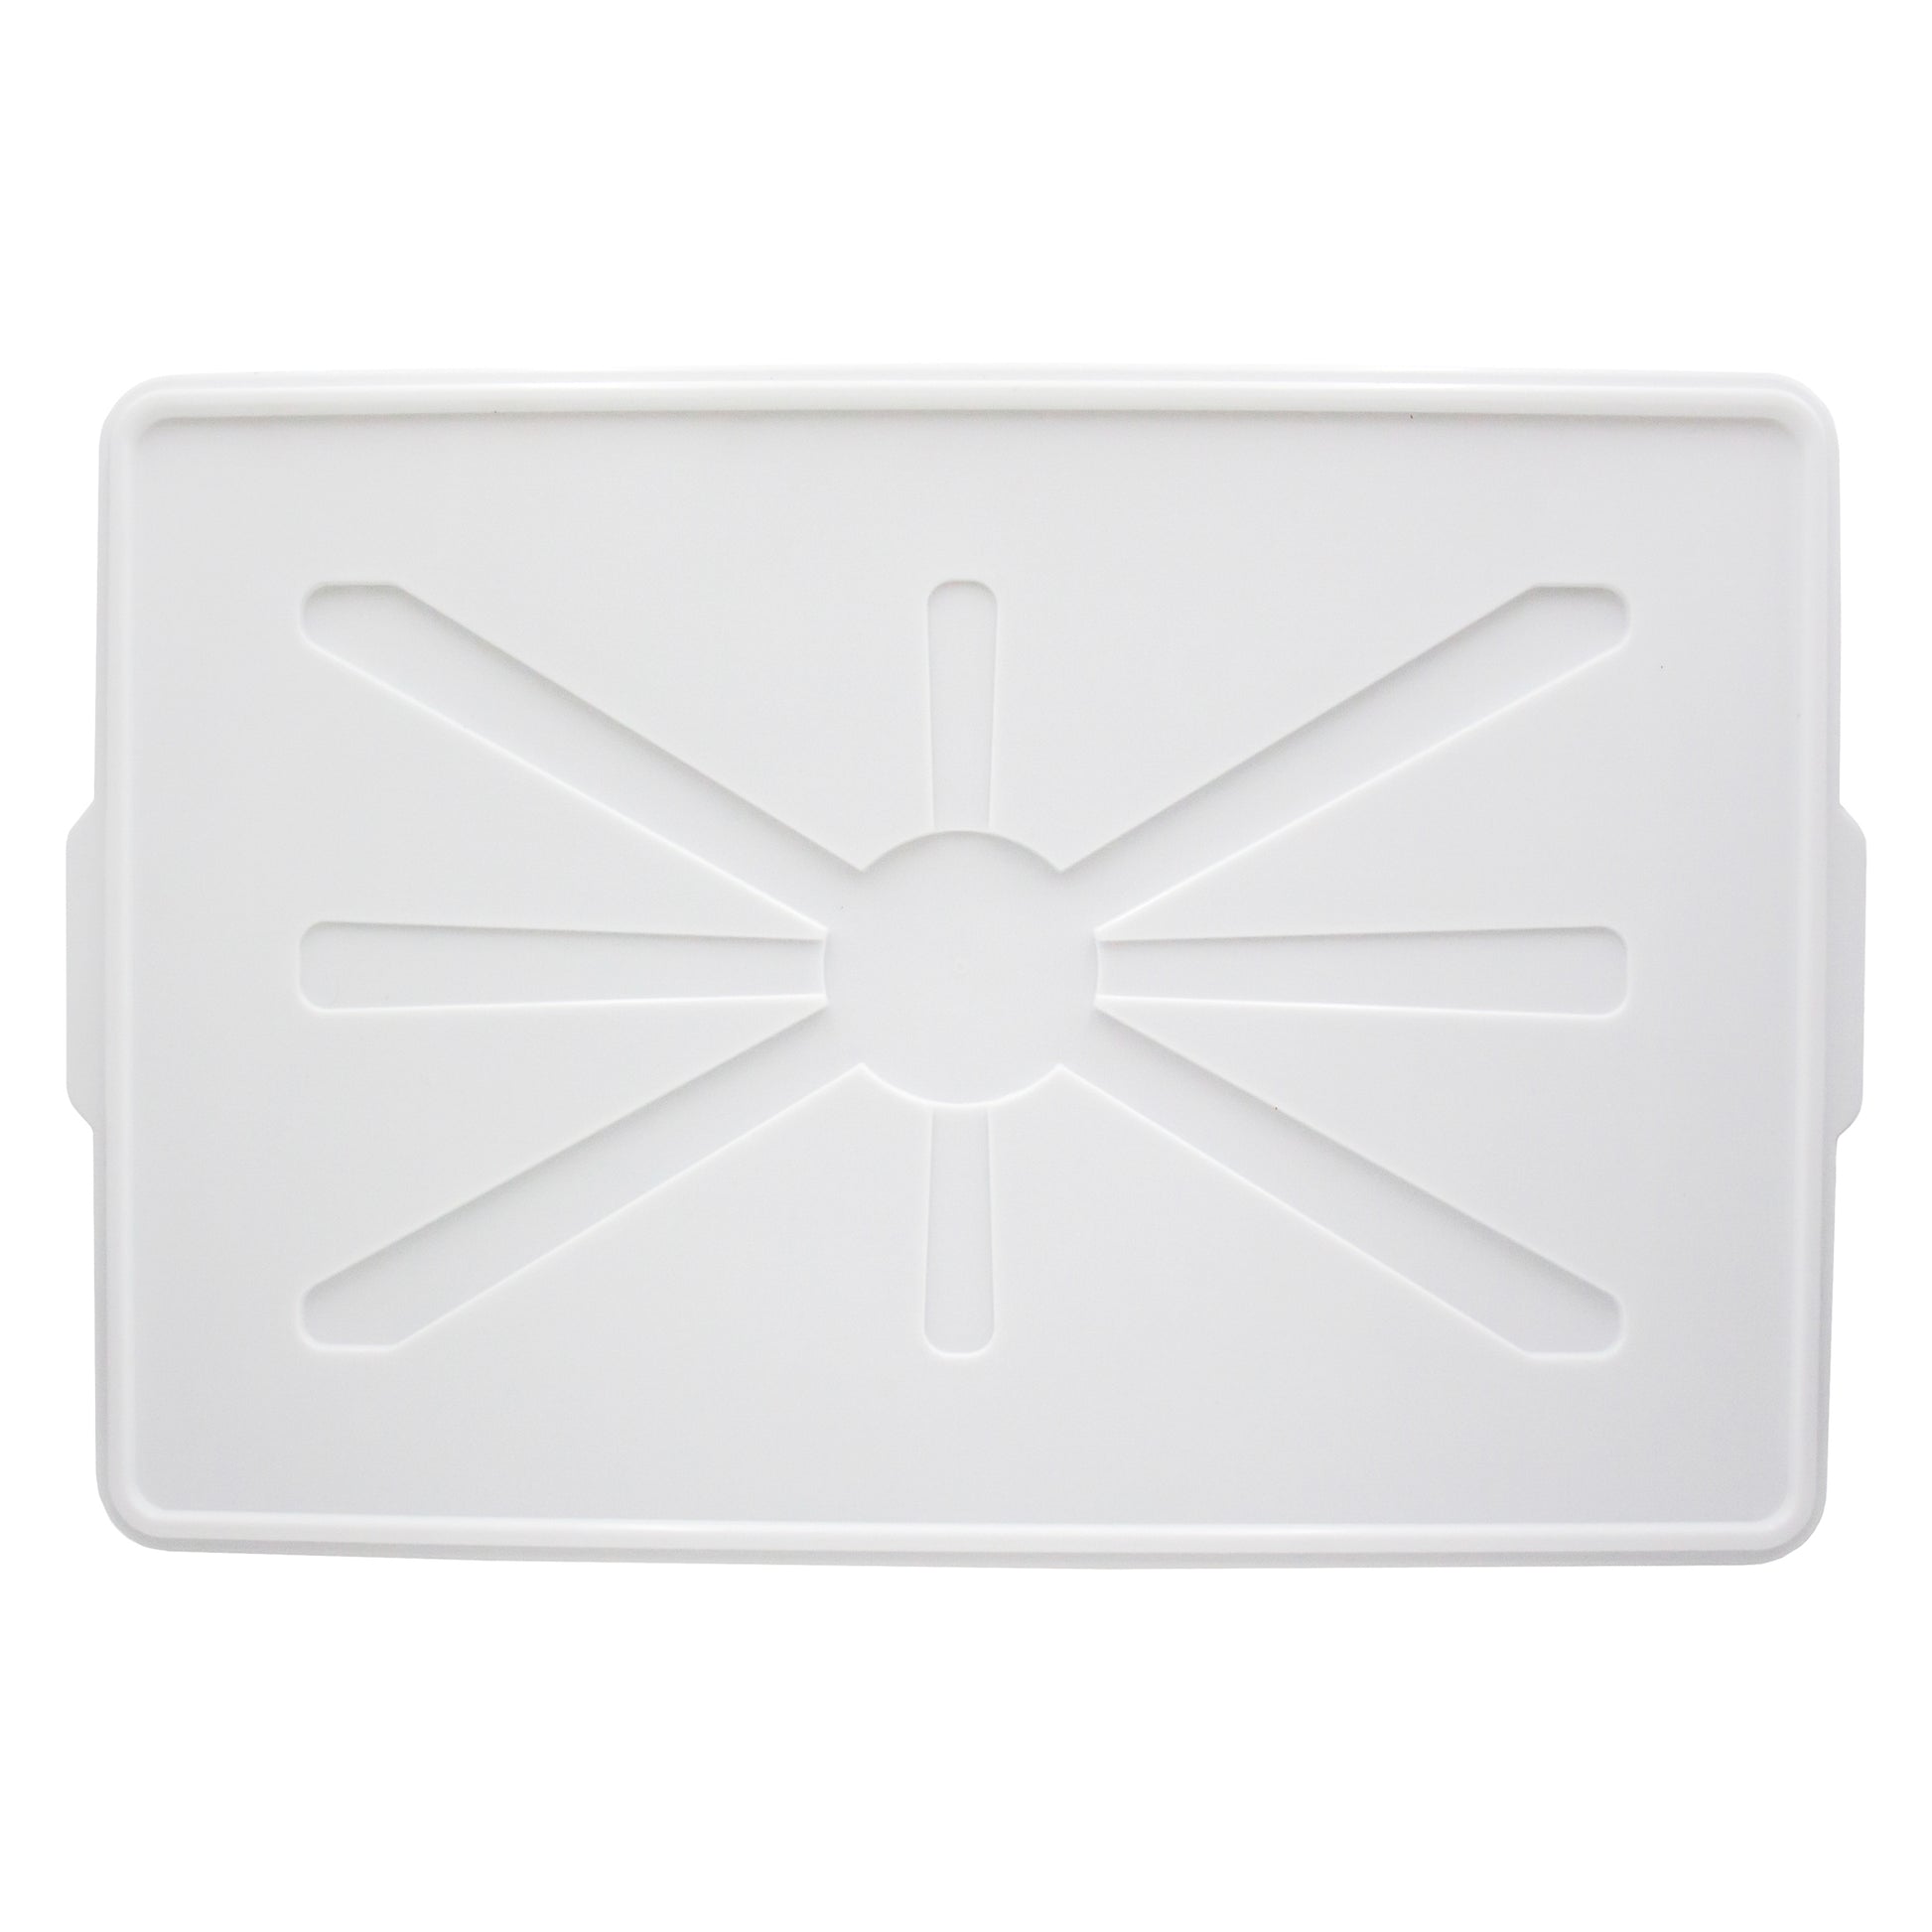 white food grade plastic crate lid. 62 by 43 by 5 cm